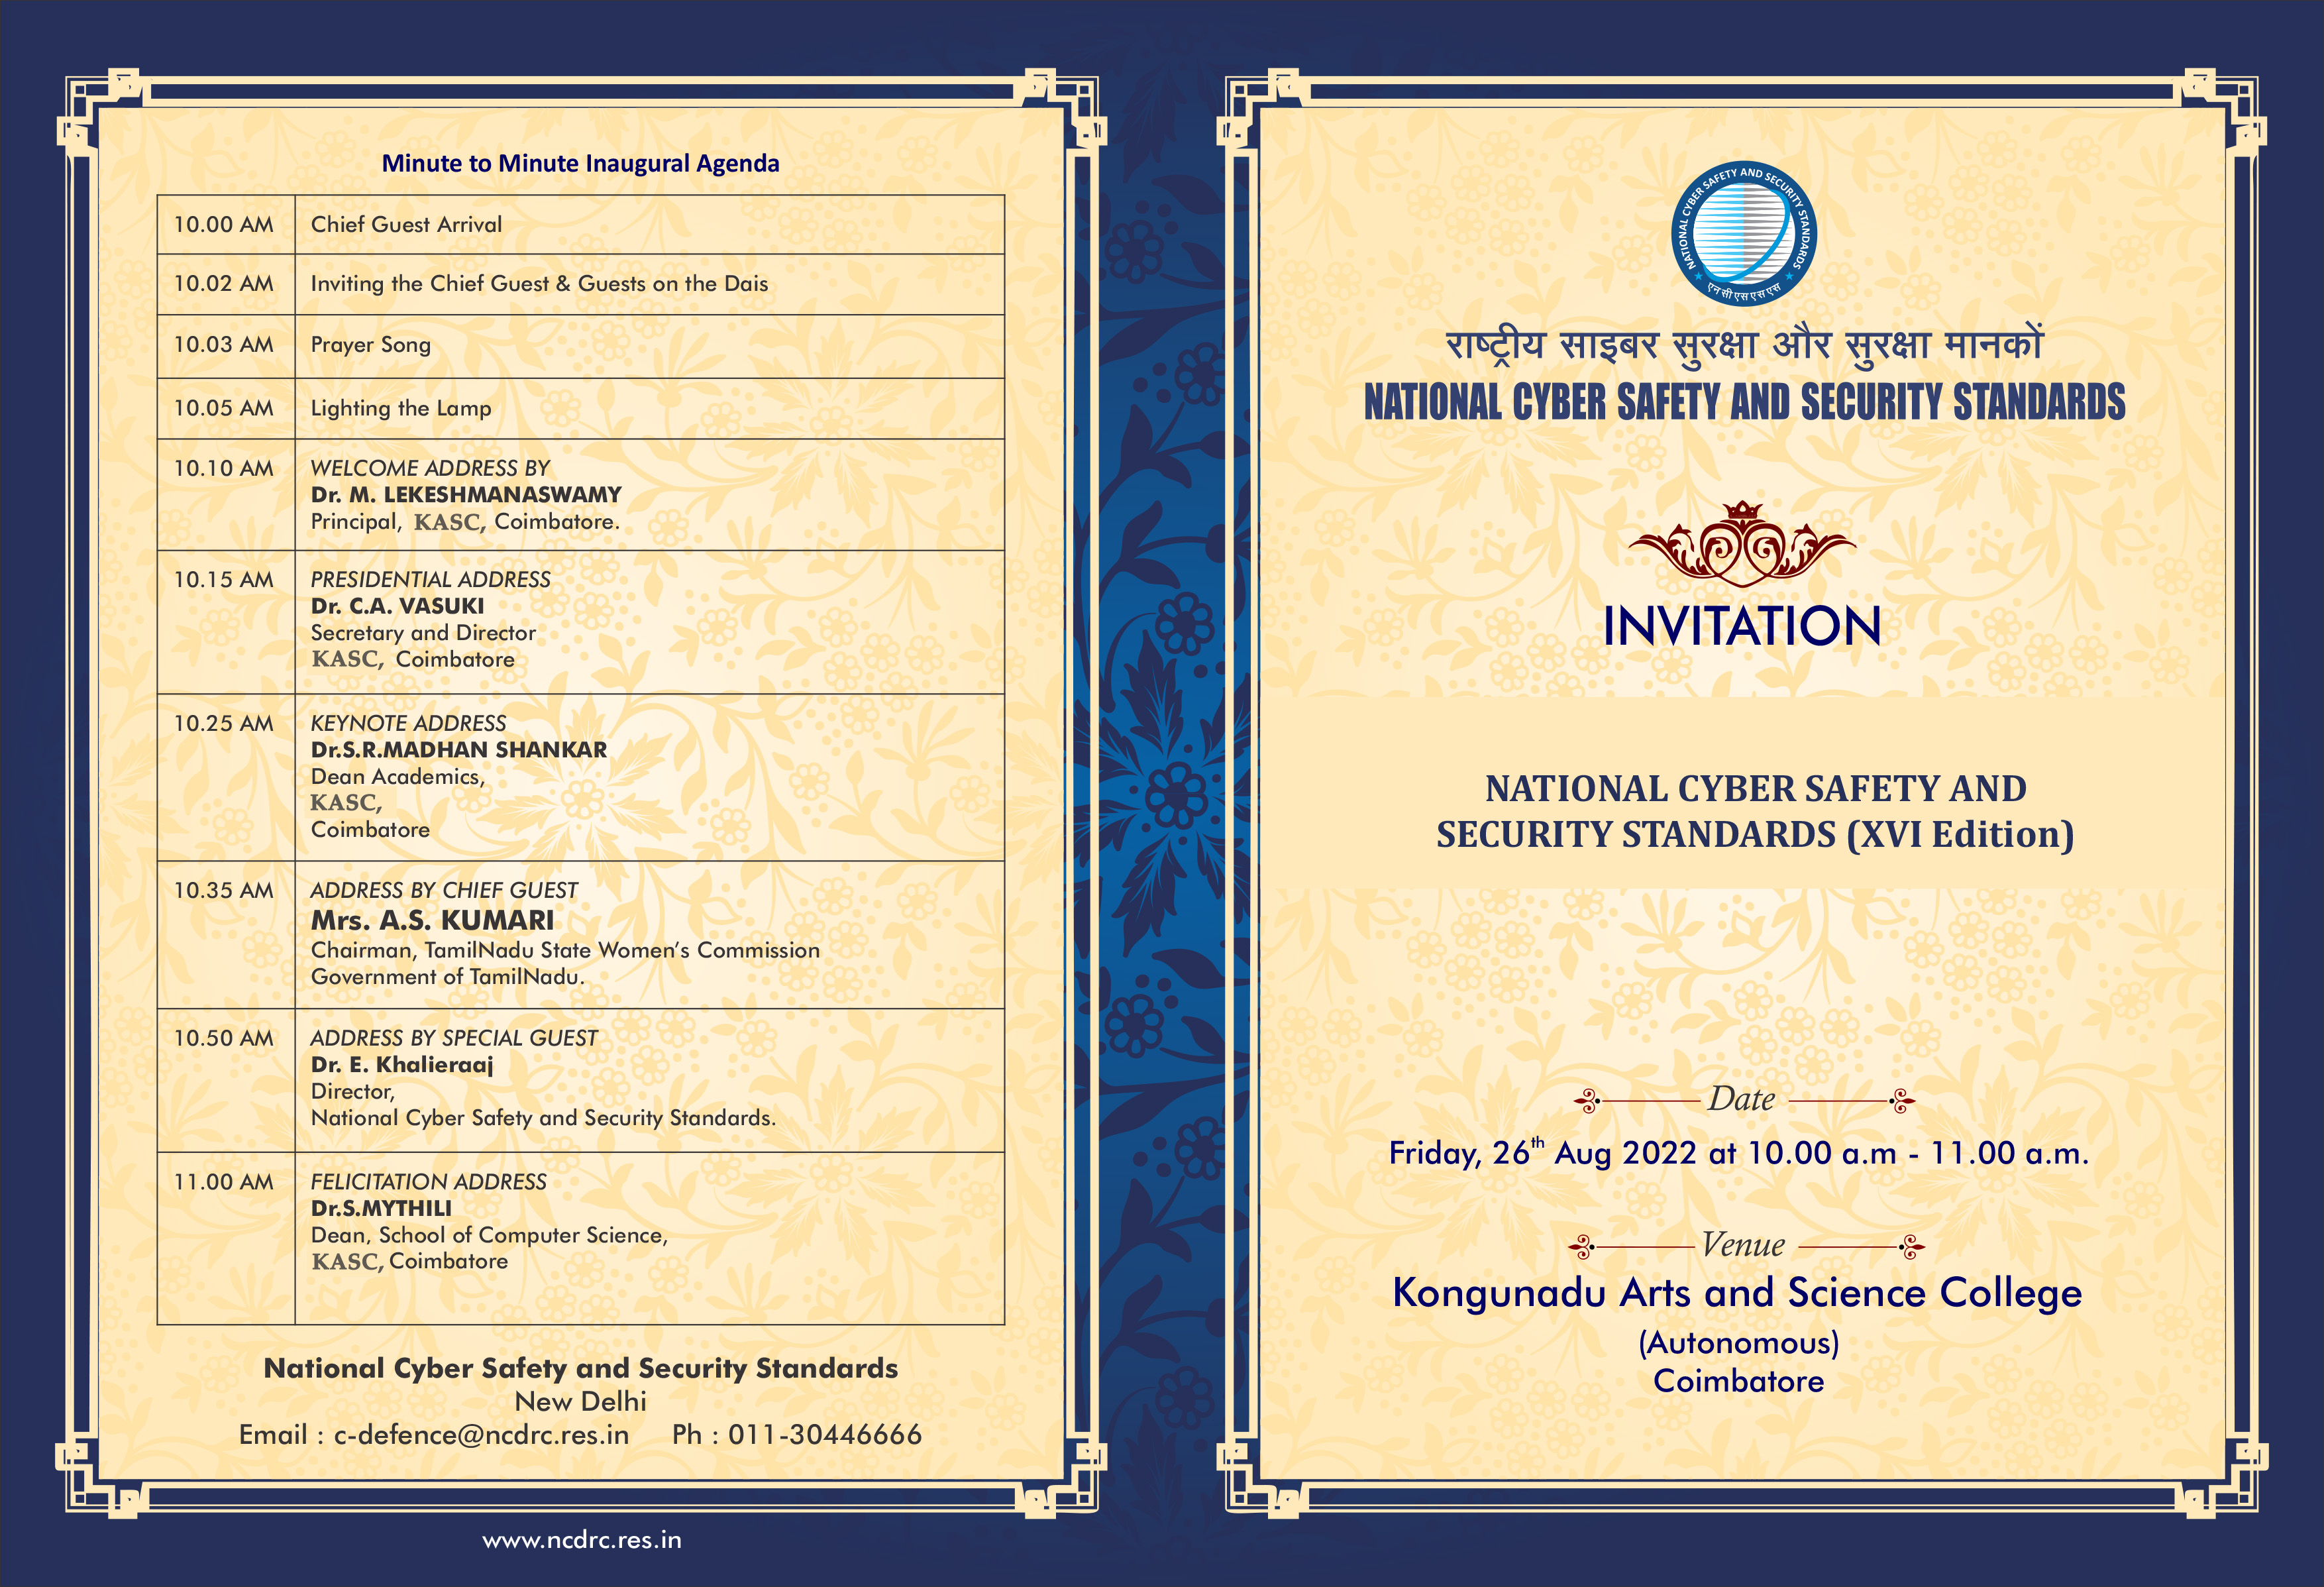 National Cyber Safety and Security Standards(XVI Edition) 26th and 27th Aug 2022